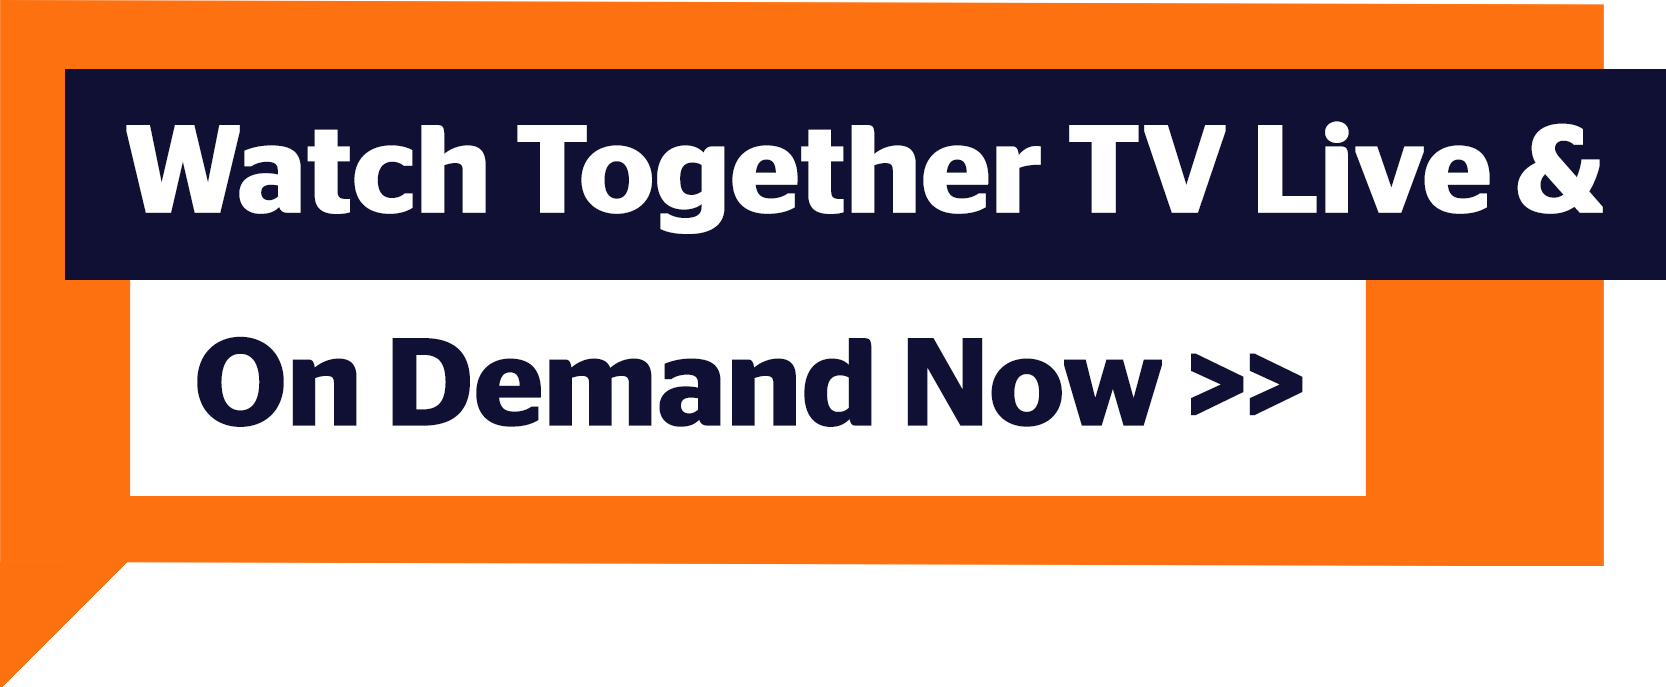 Watch Together TV Live and On Demand now